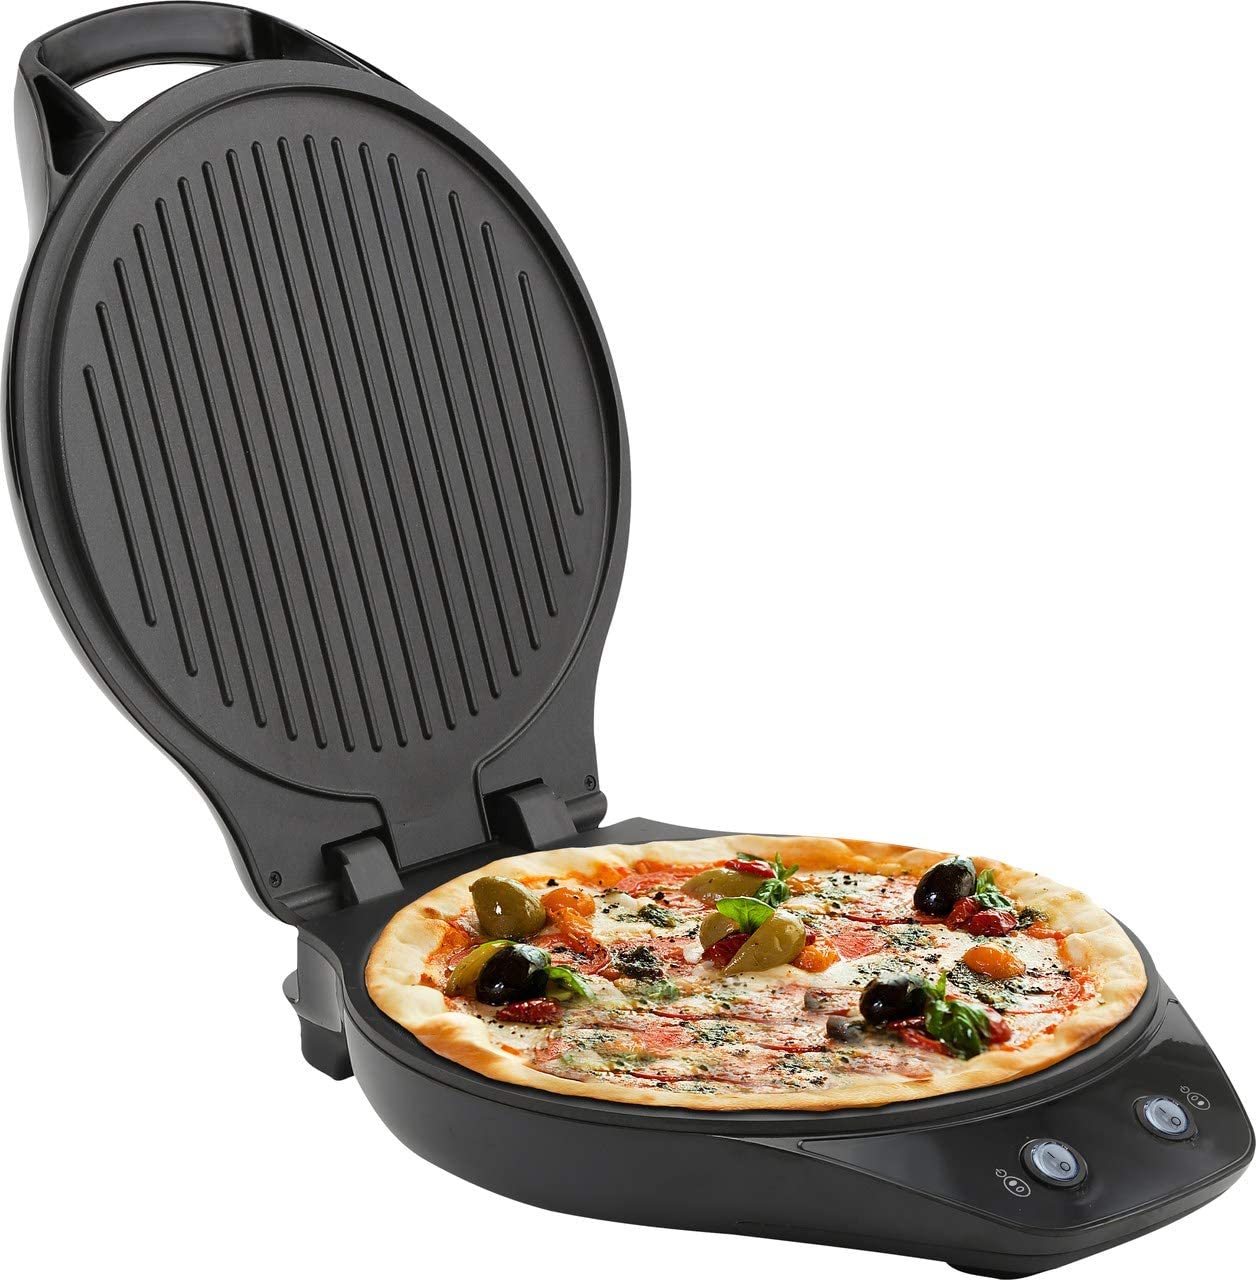 3 in 1 PIZZA MAKER Contact Grill Panini Burger Maker 1200 Watts